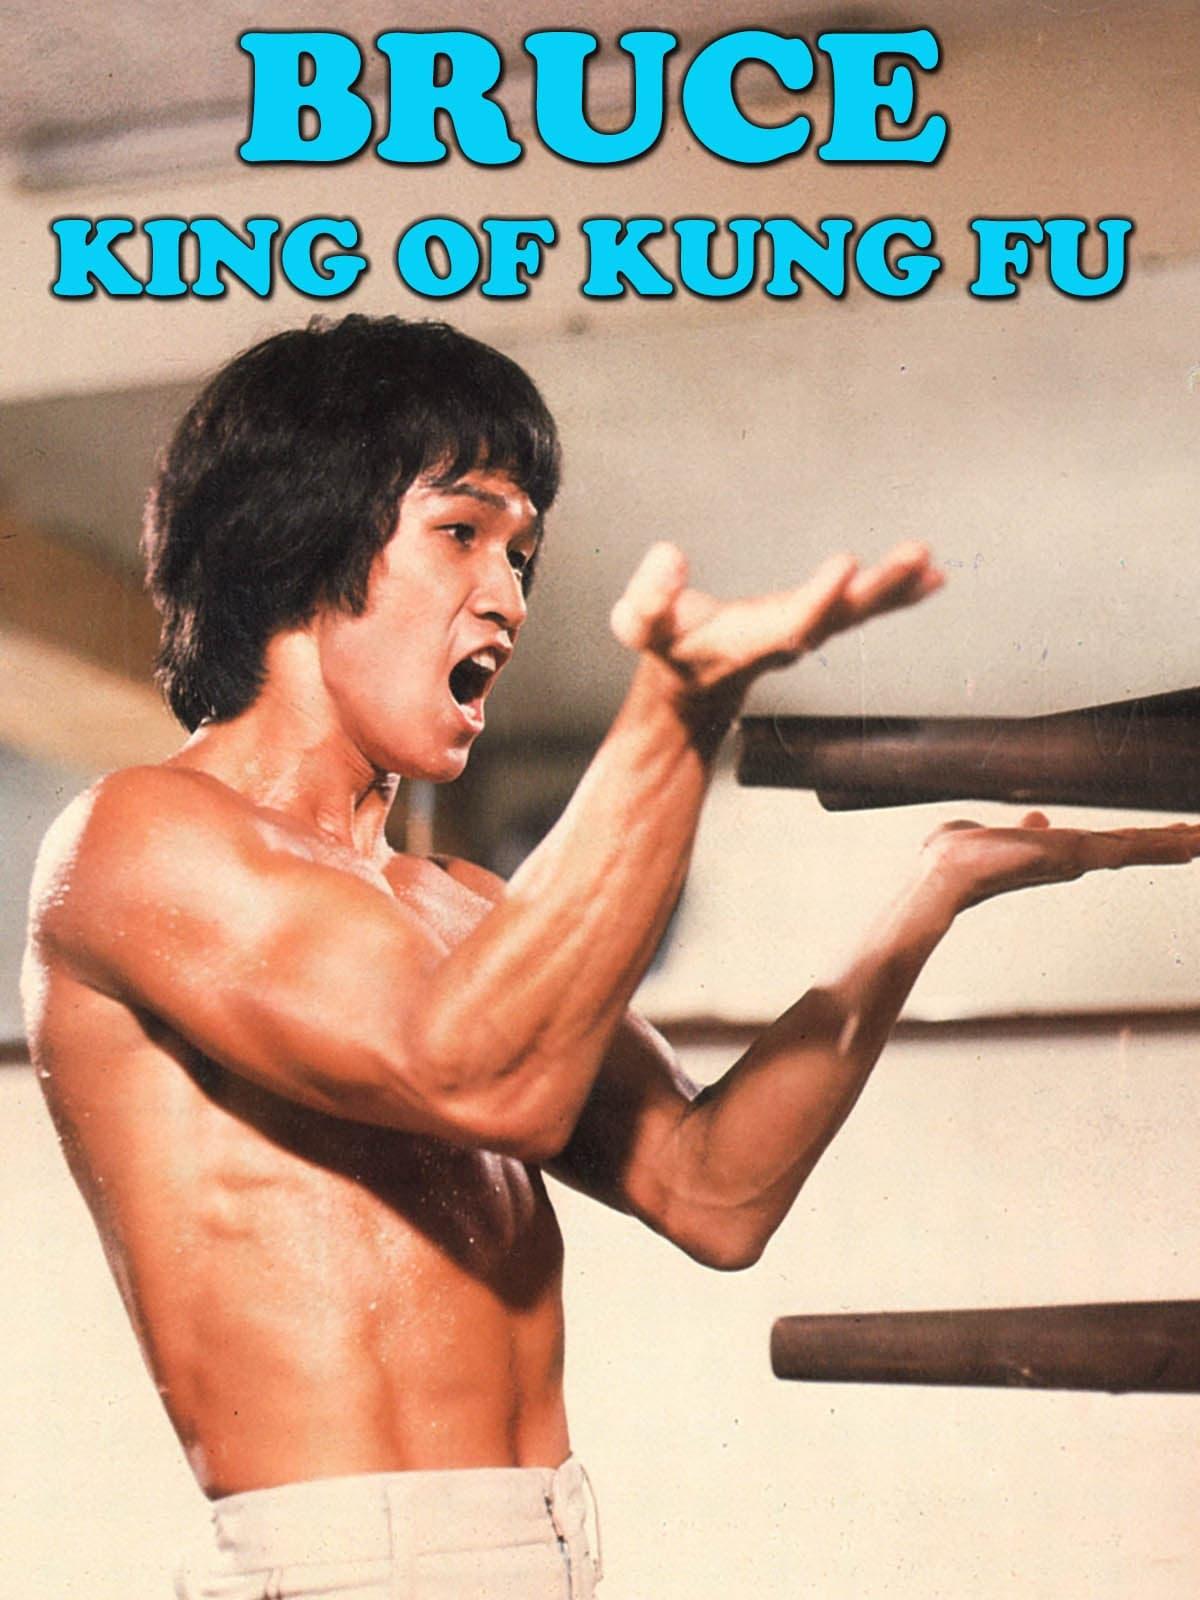 Bruce, King of Kung Fu poster